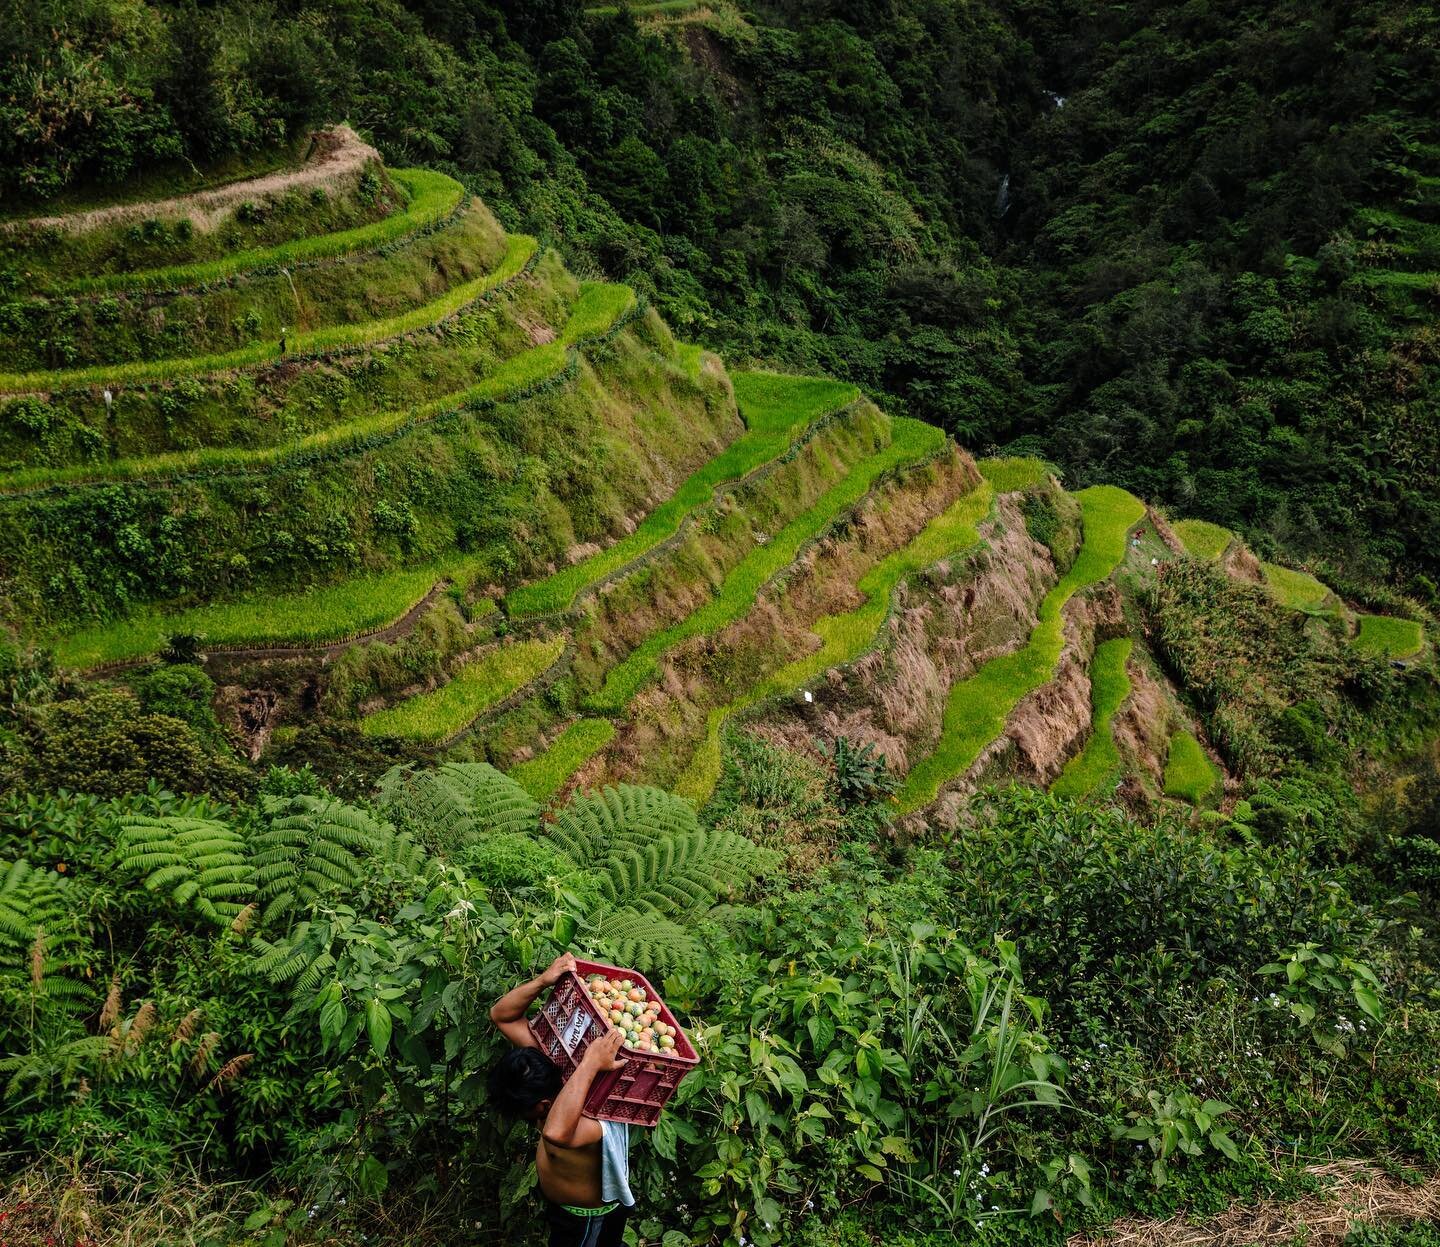 I spent three inspiring days in Banaue's lush mountains and renowned rice terraces with Philippa Forrester and the National Geographic Storytellers Collective. Swipe left to see more. We coached a diverse, dedicated group from around the world, unite